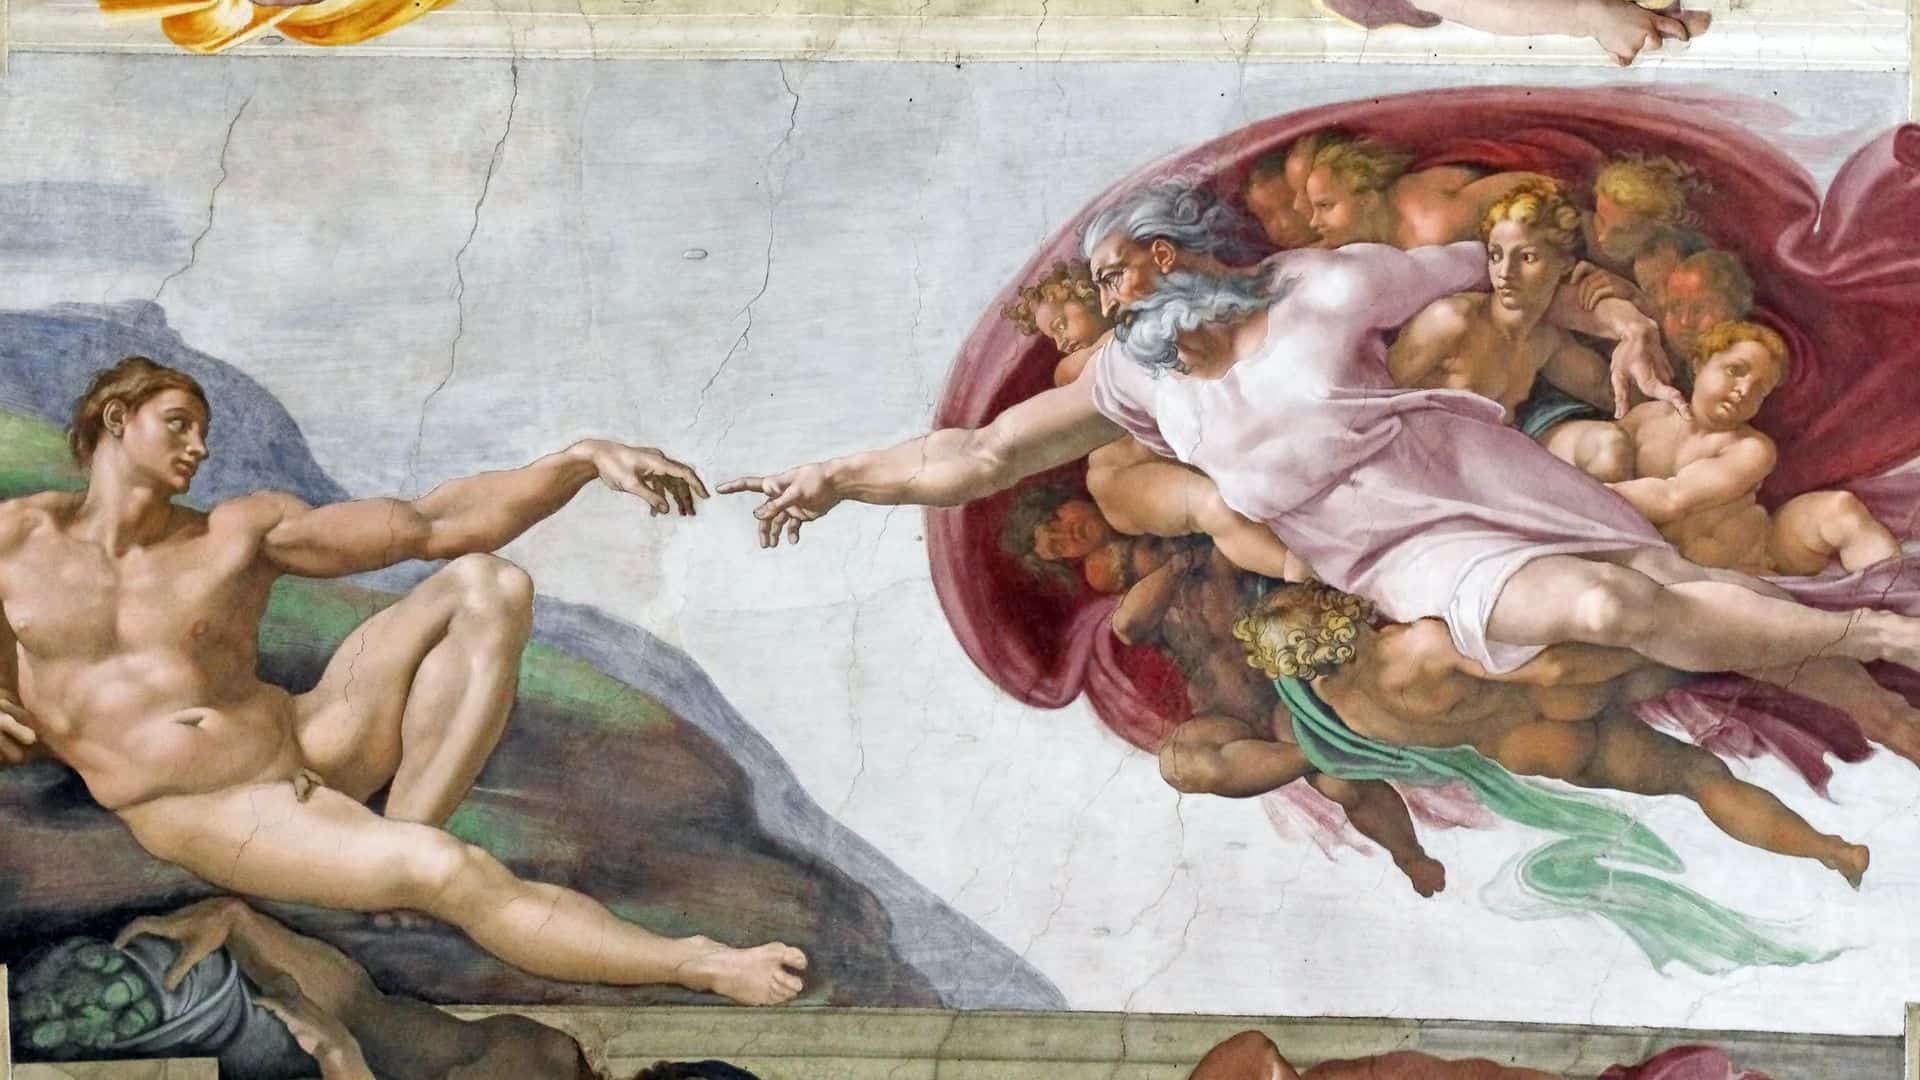 Michelangelo's "The Creation of Adam" in the Sistine Chapel